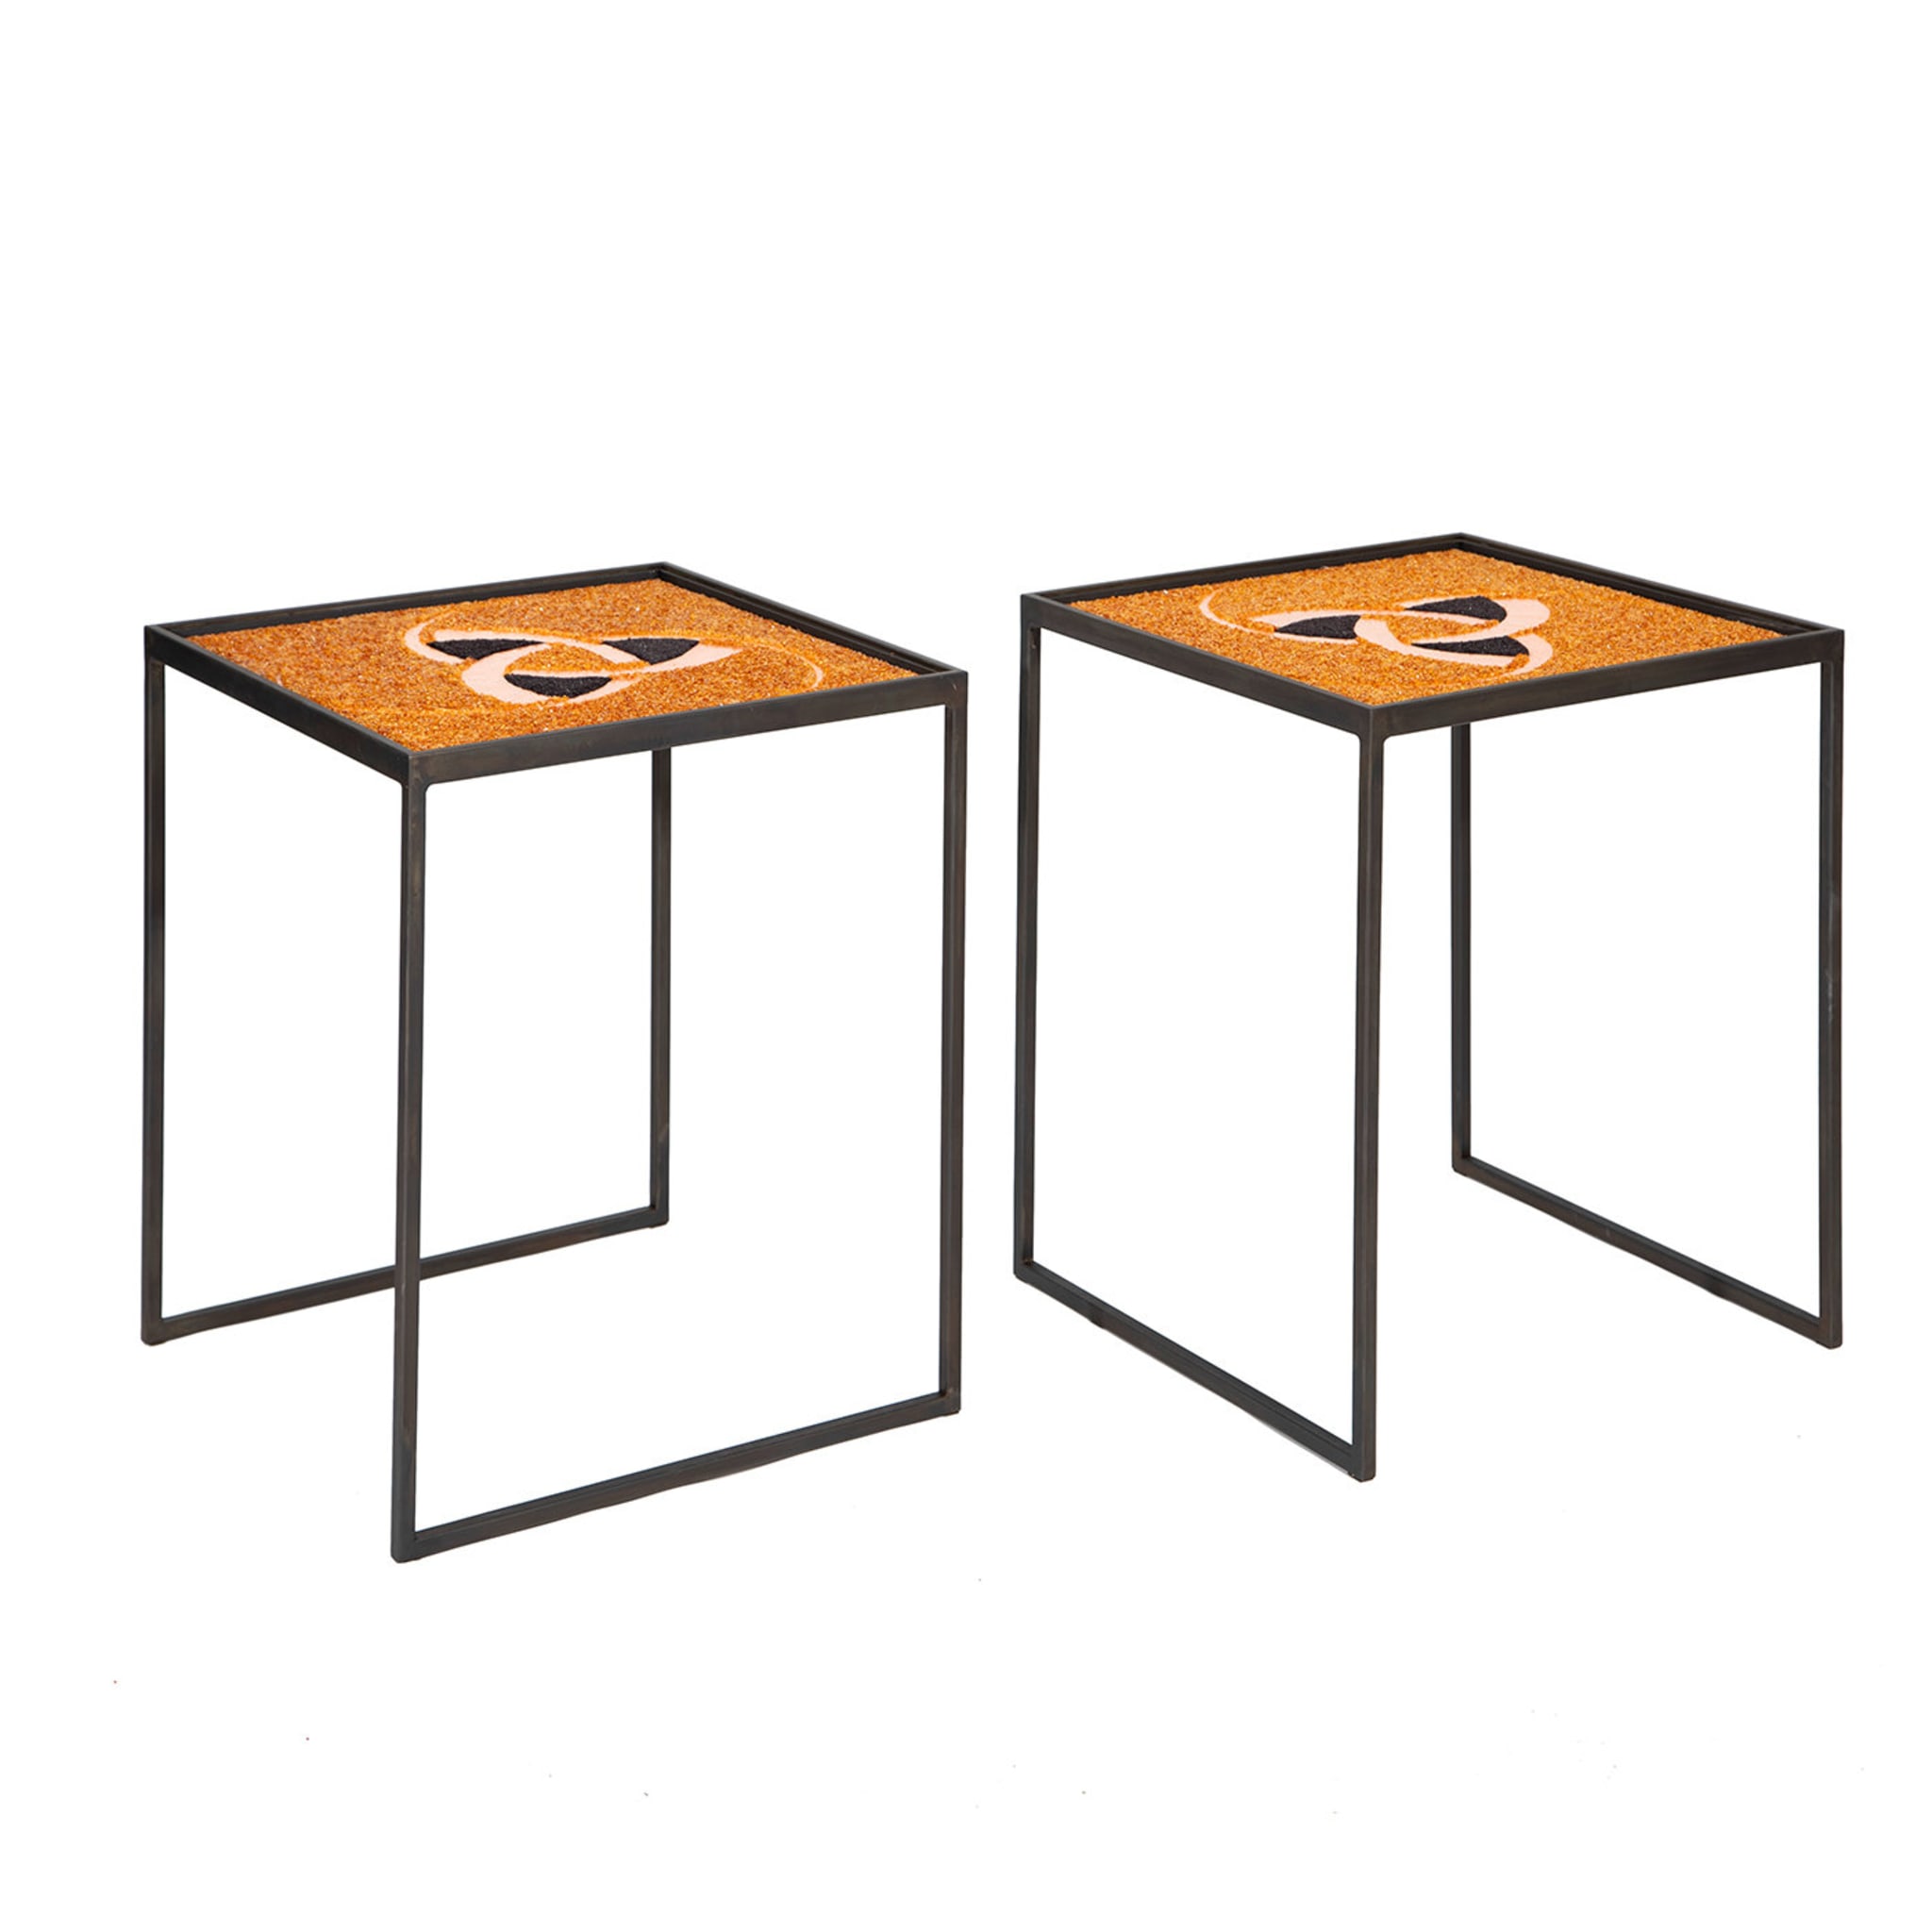 Rosaleen Side Tables - Alternative view 1